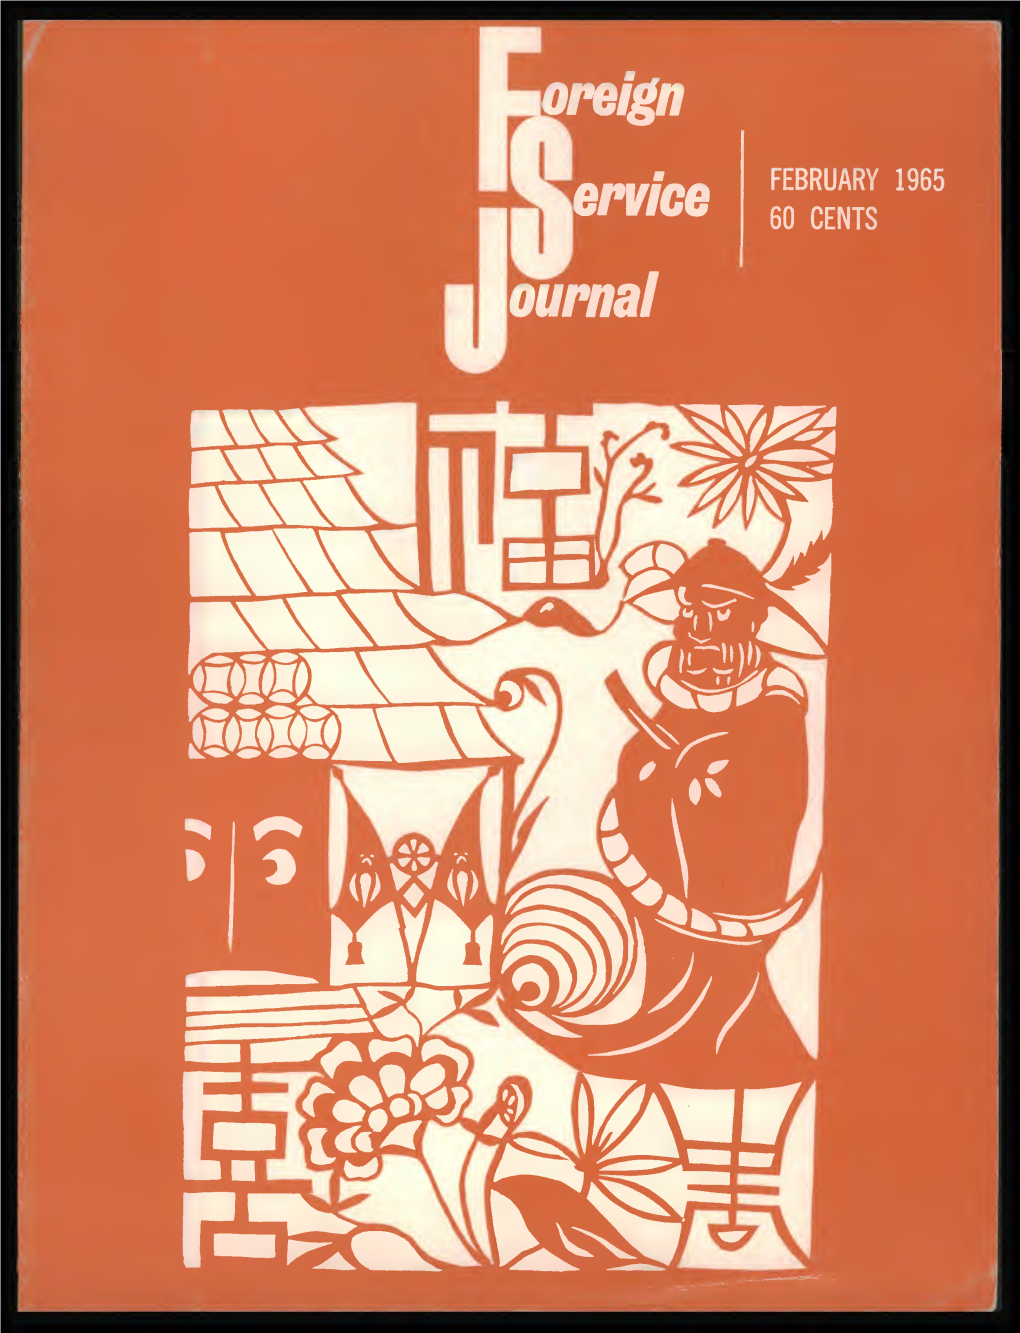 The Foreign Service Journal, February 1965